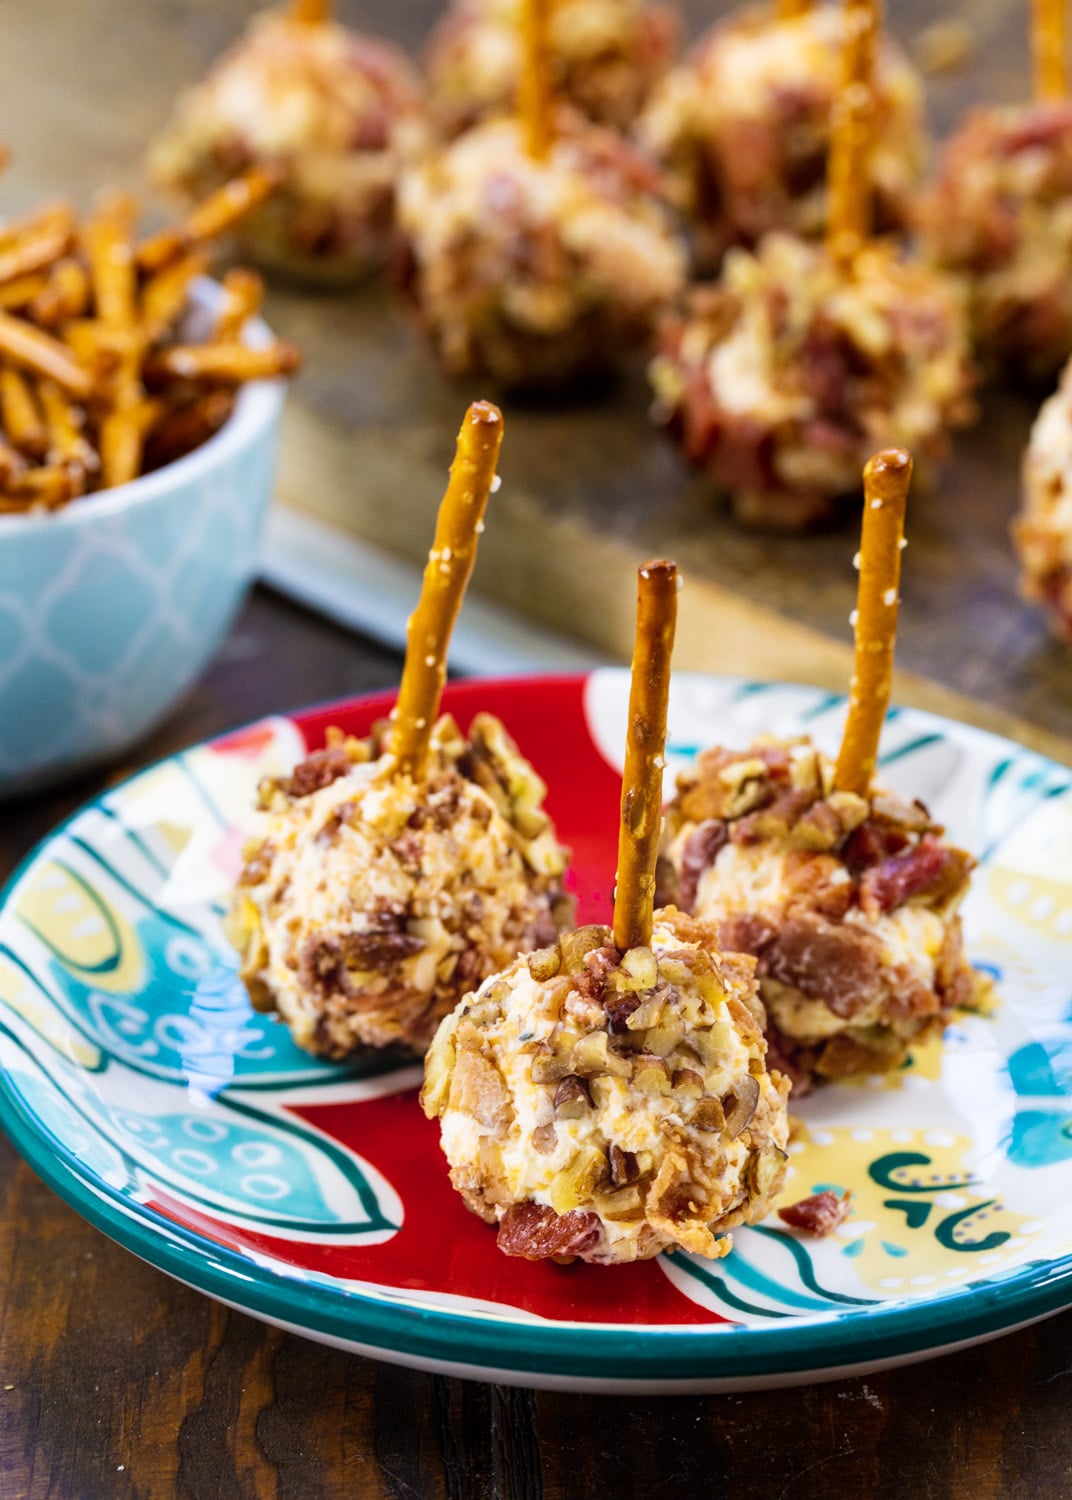 Three Bacon Cheese Ball Bites on a blue and red plate.